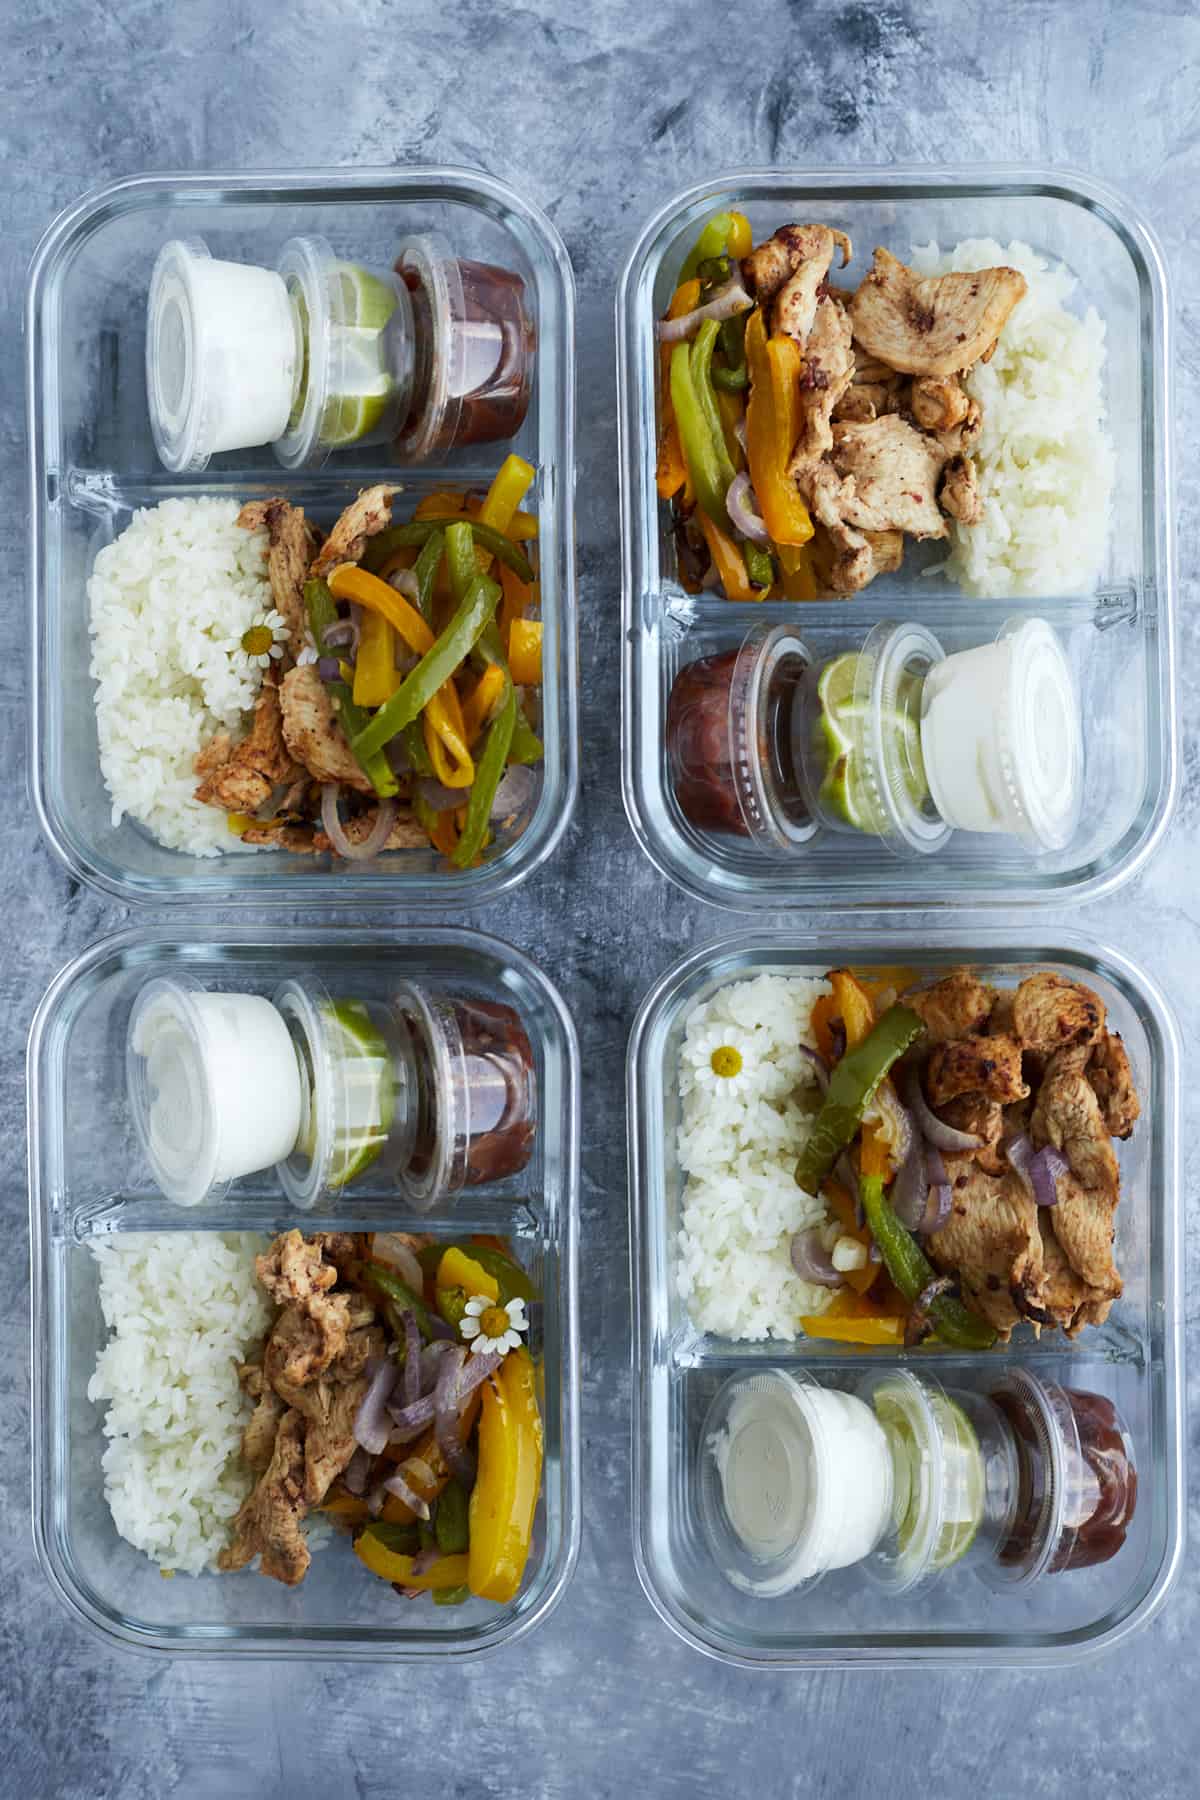 four meal prep boxes full of chipotle chicken with white rice, salsa, guacamole, and sour cream